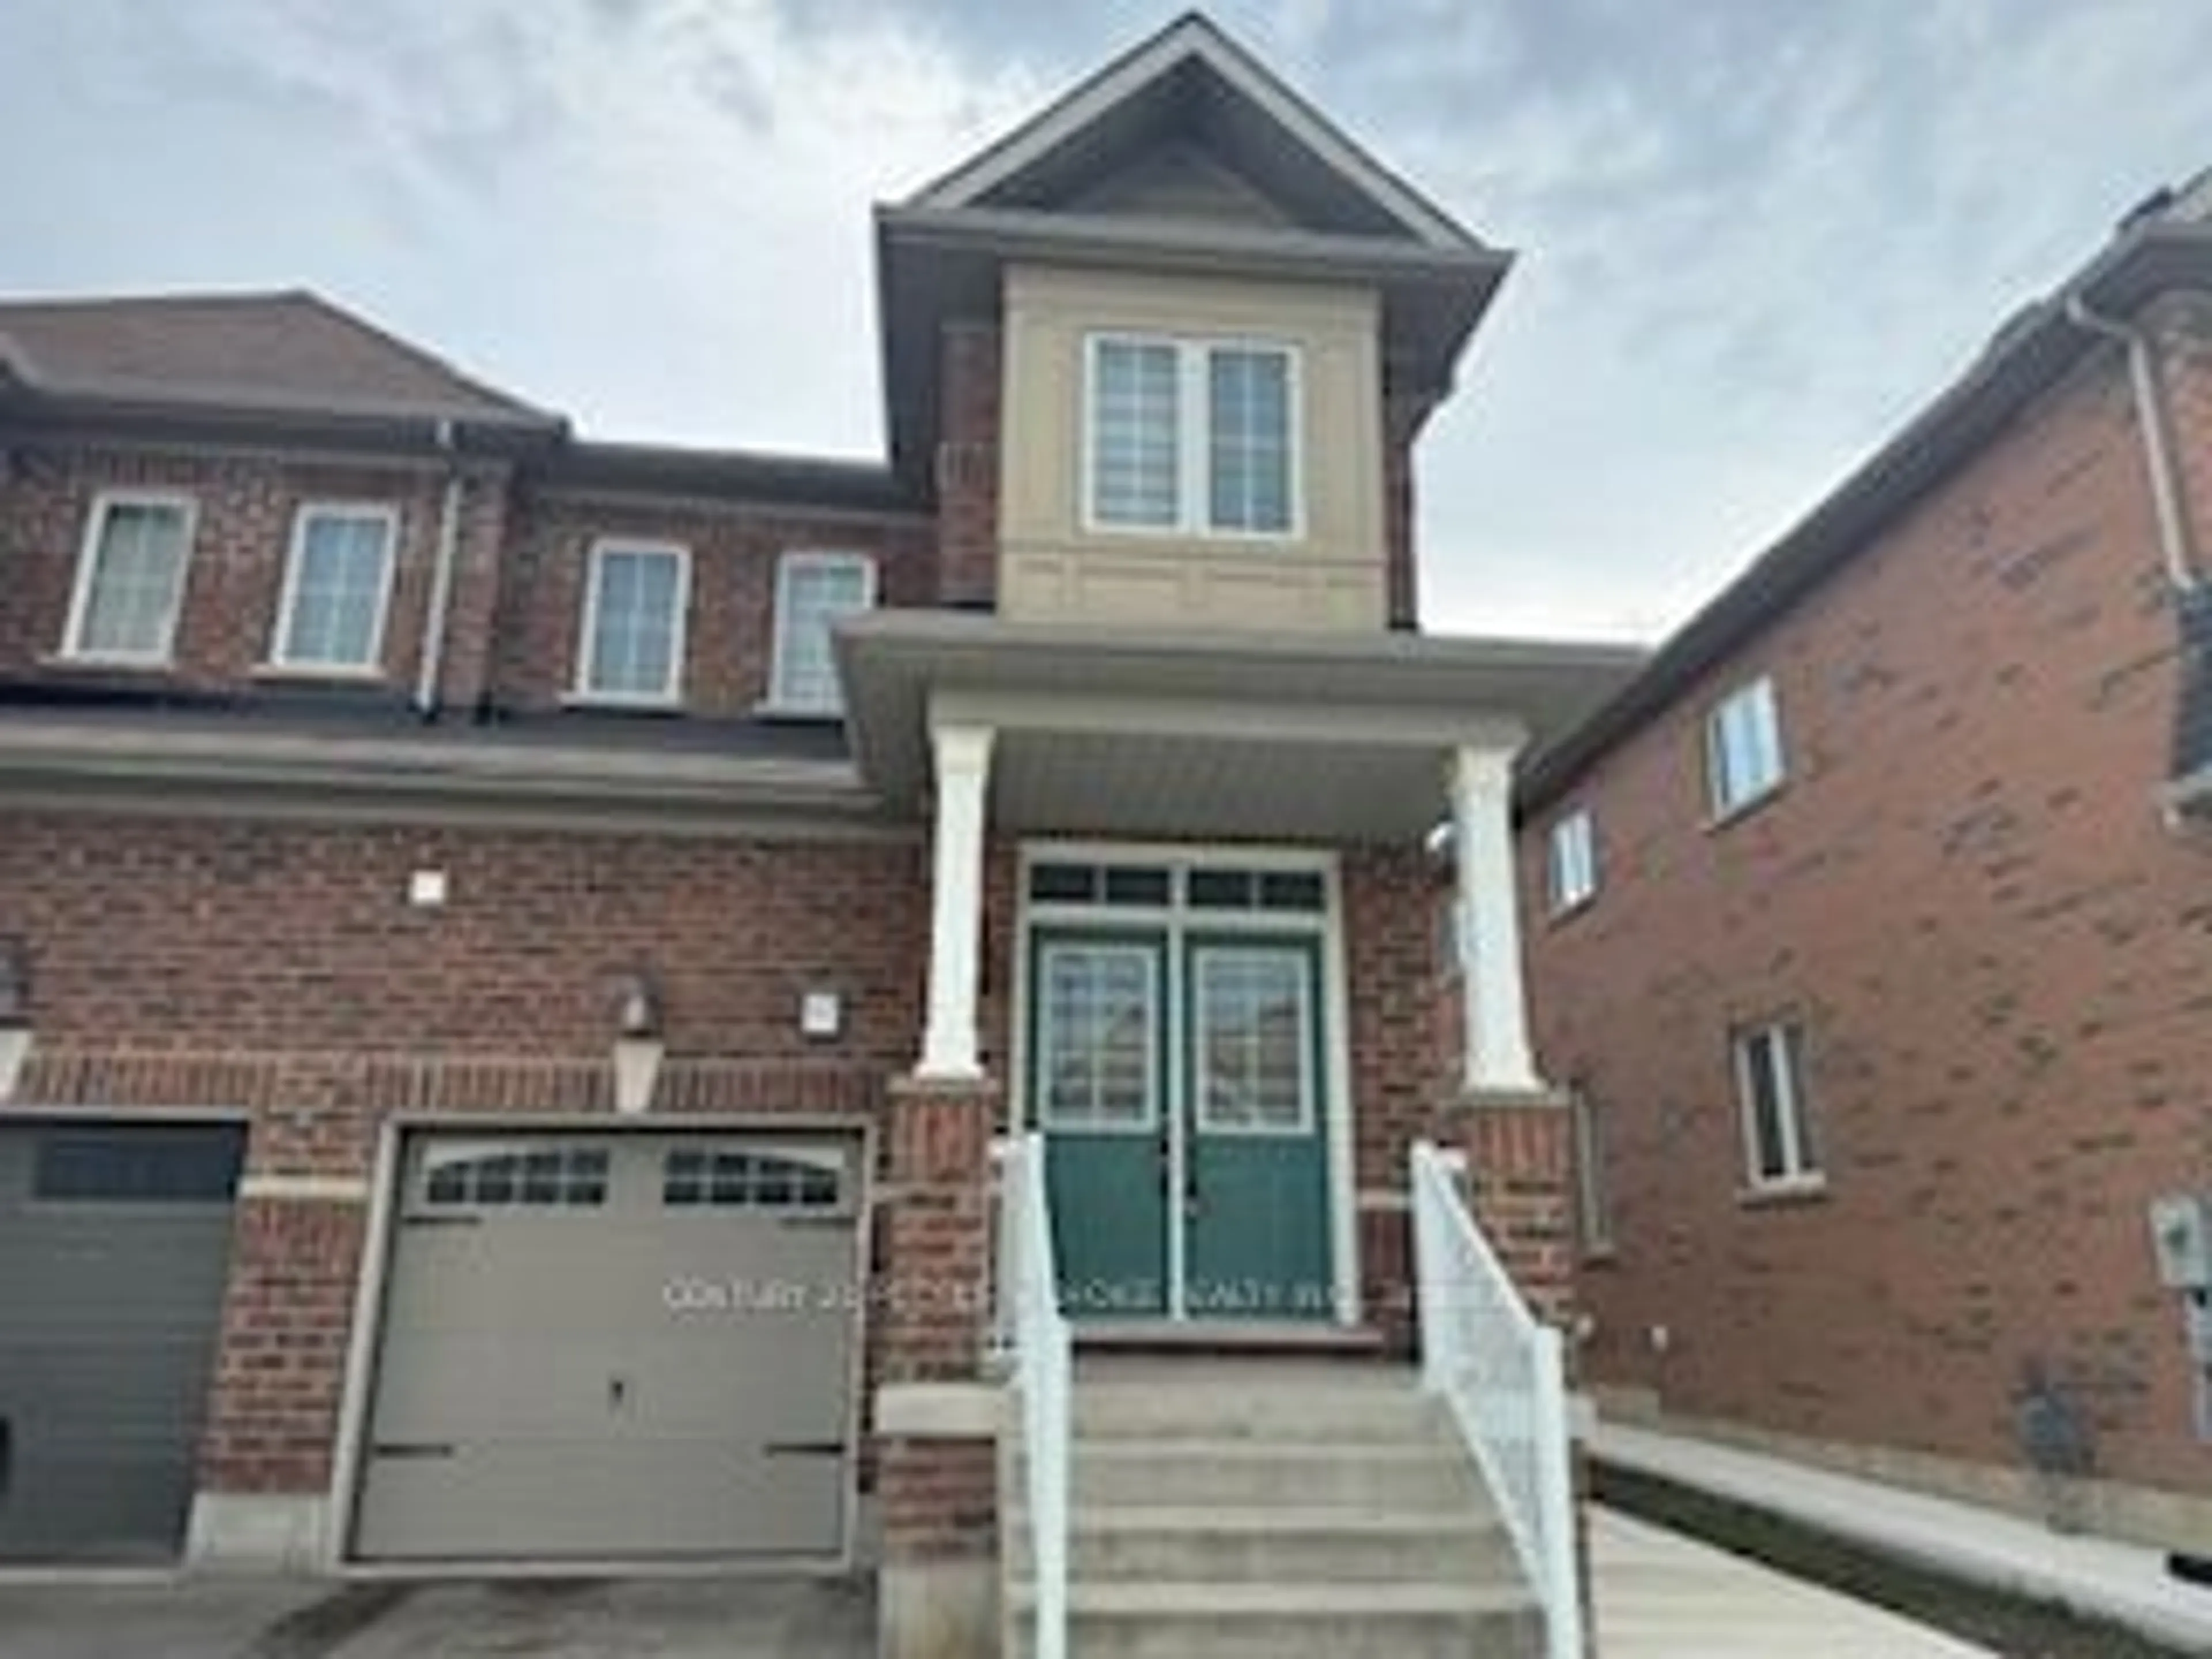 Home with brick exterior material for 597 Remembrance Rd, Brampton Ontario L7A 4L2